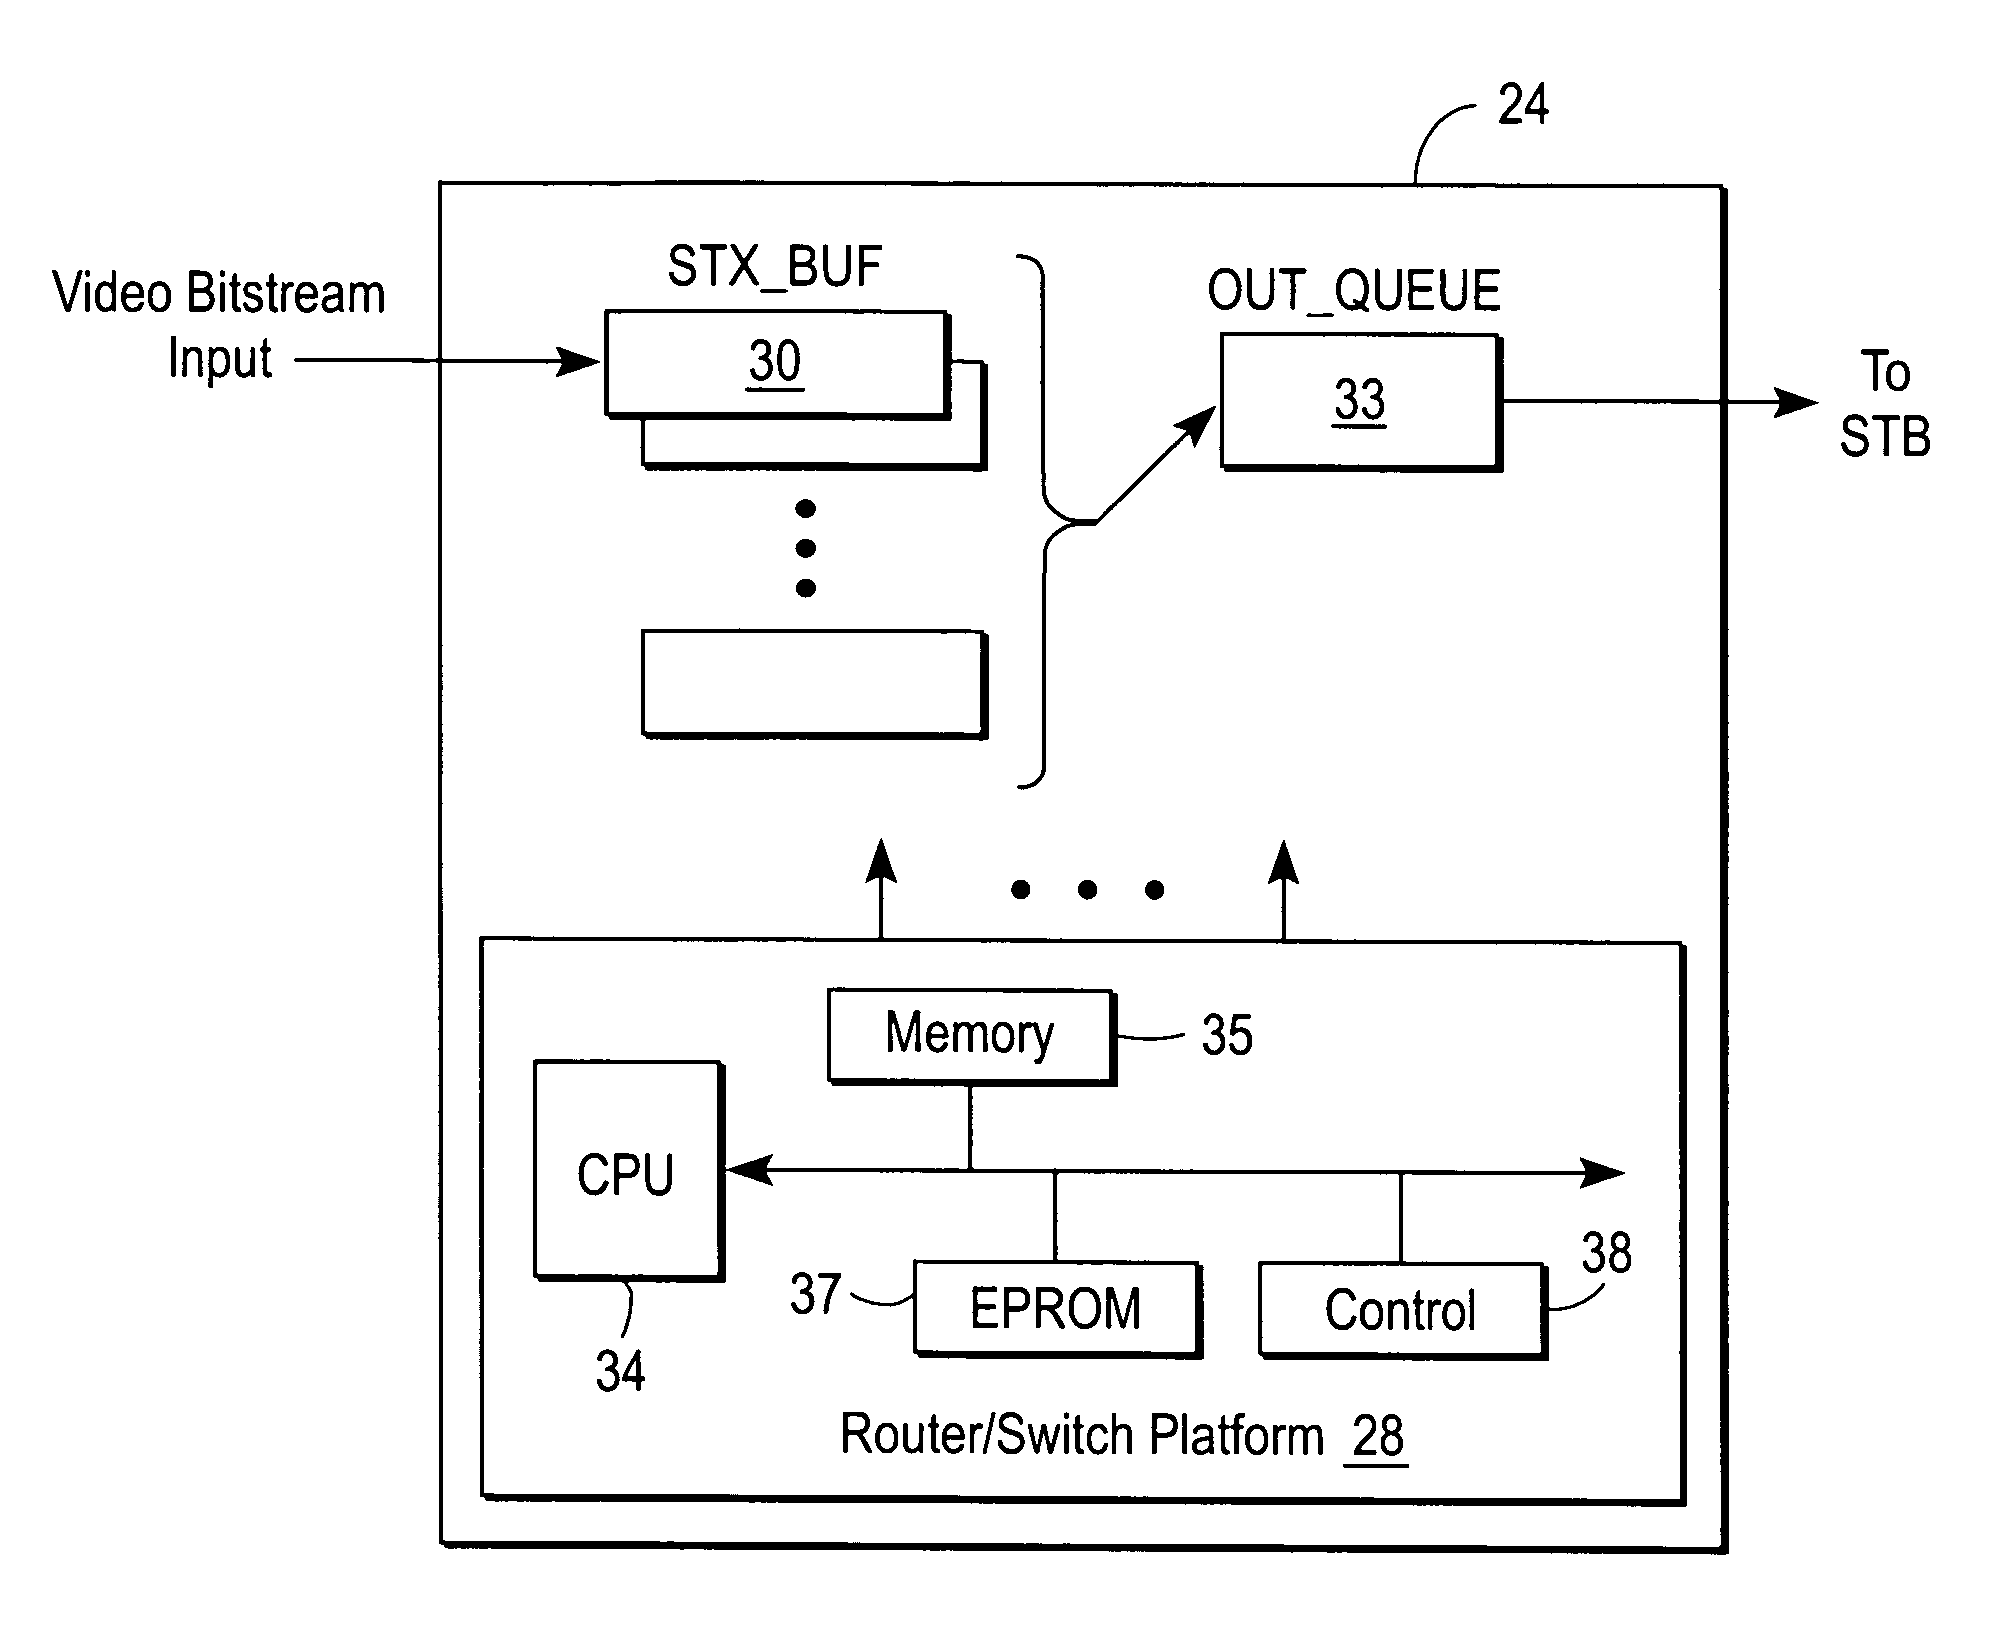 System and method for fast start-up of live multicast streams transmitted over a packet network